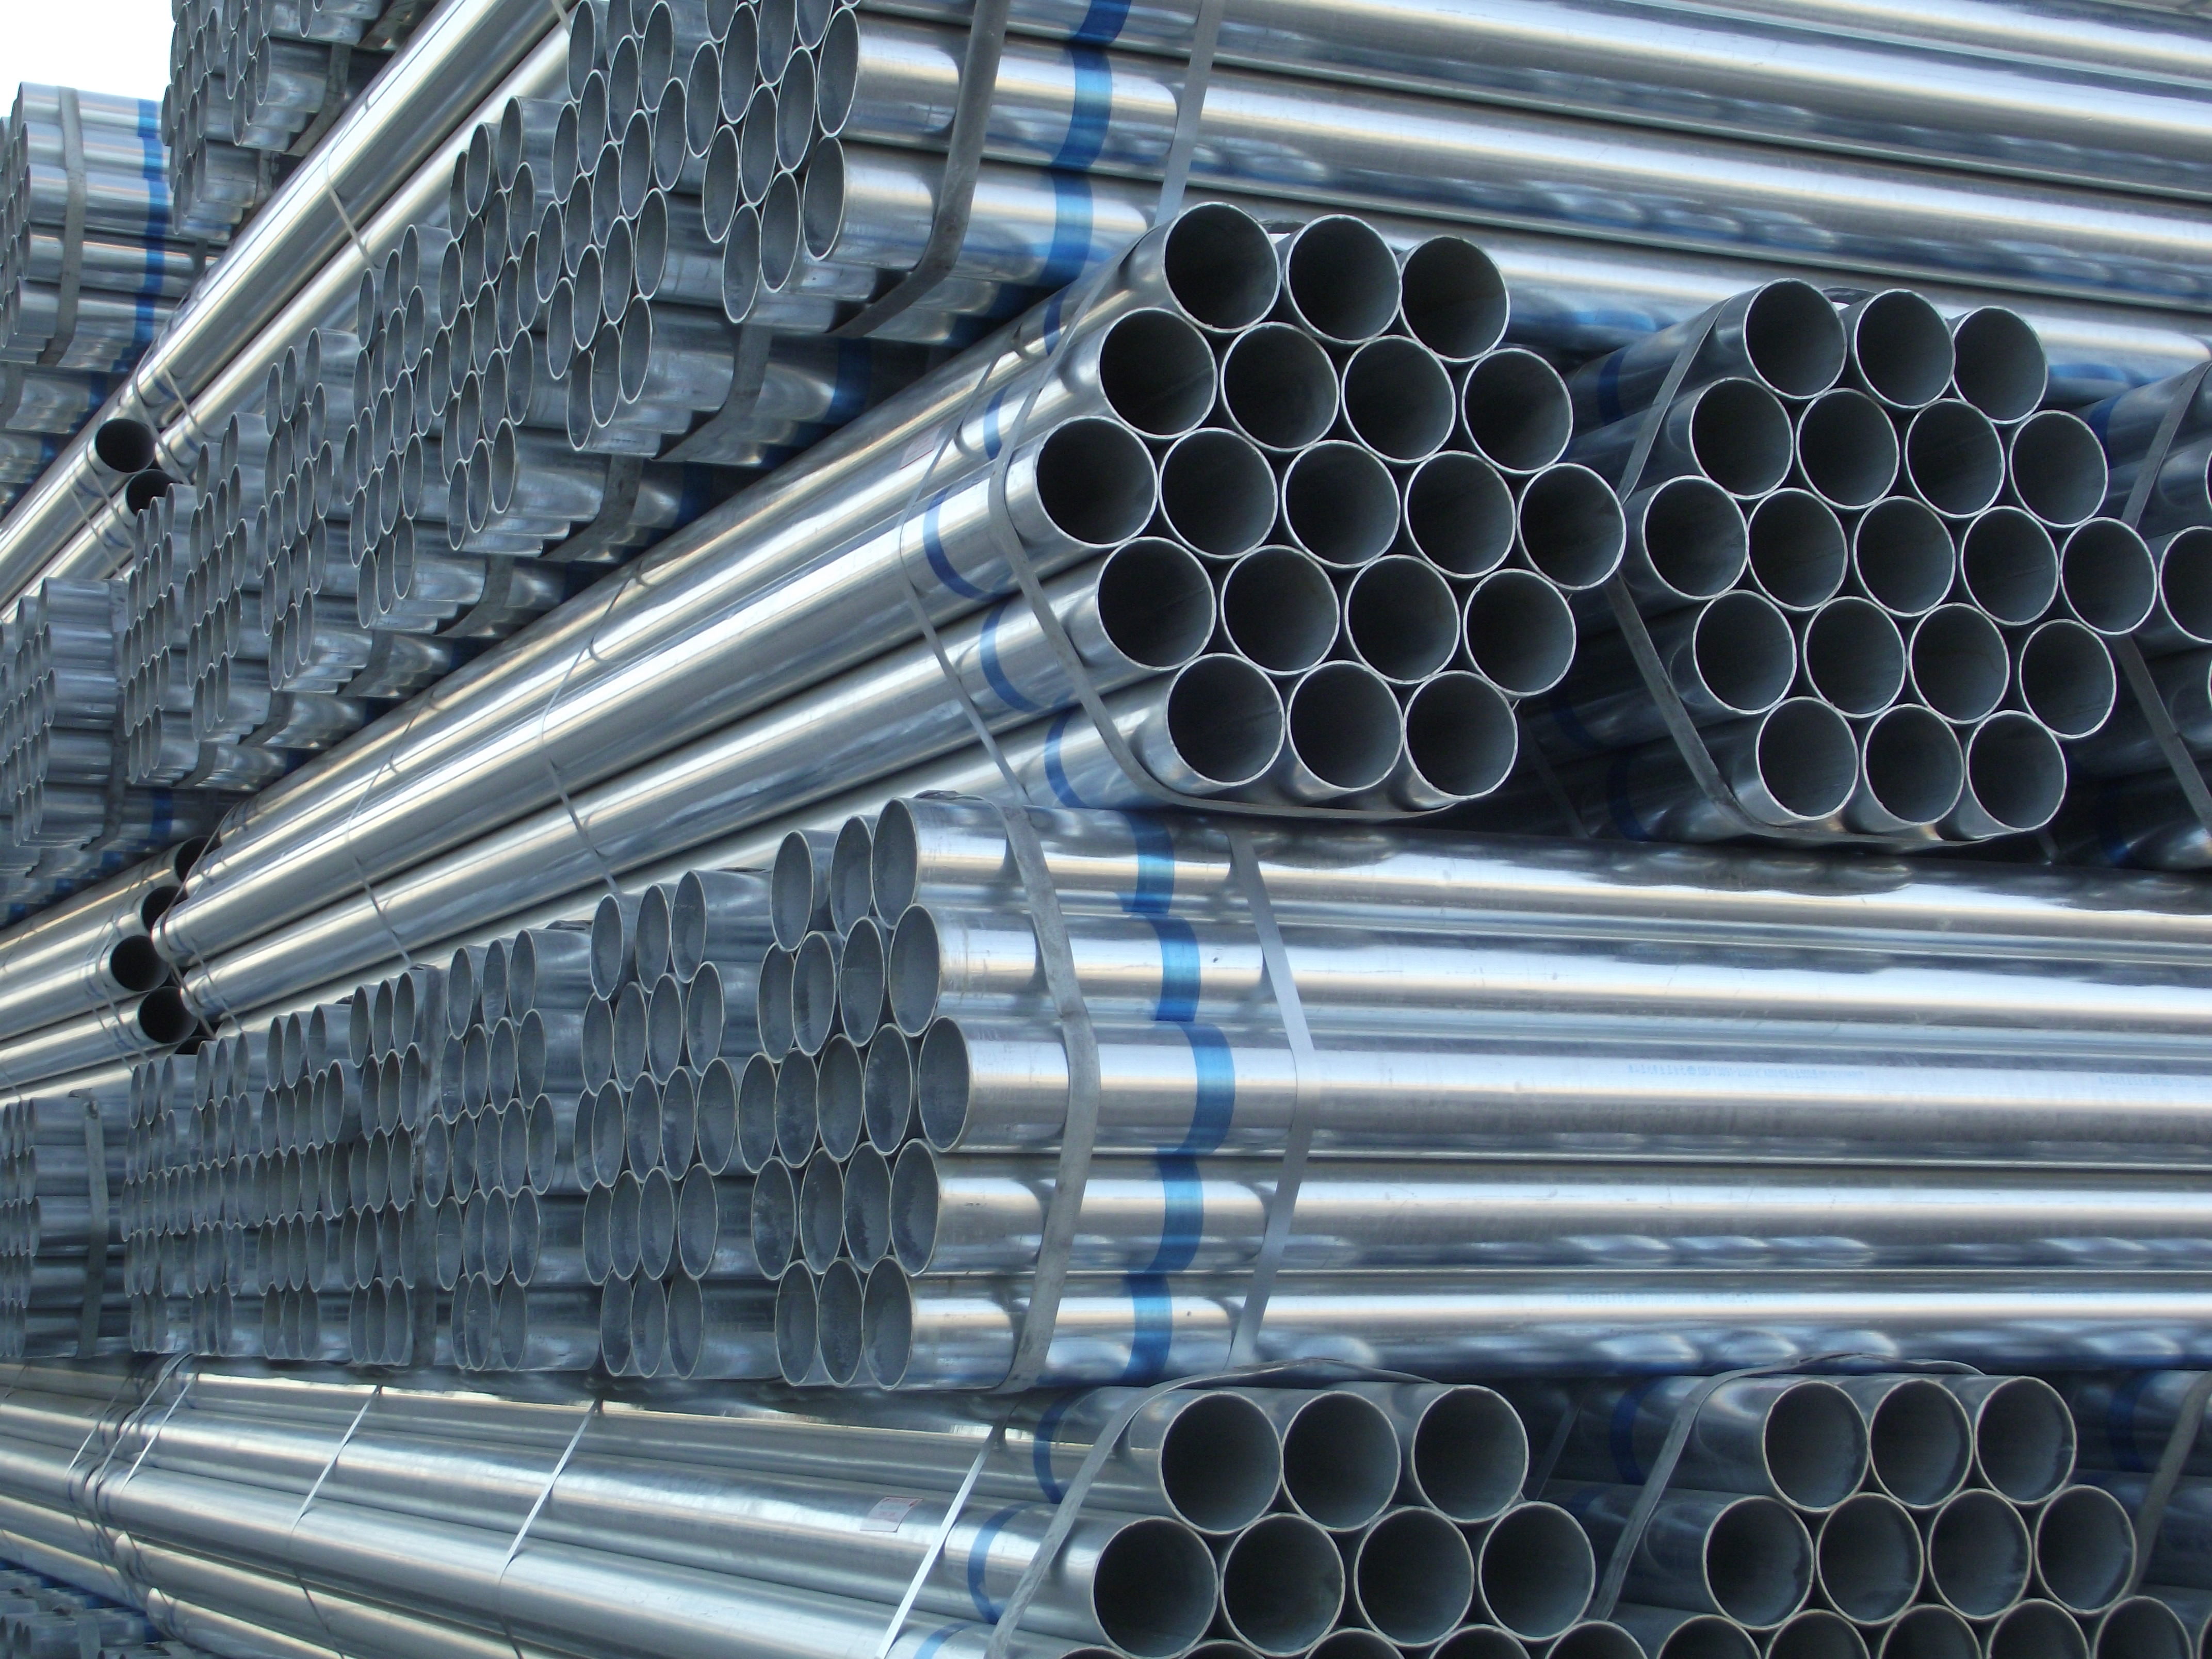 High Quality for Iron Main Gate Designs Hot Dip Galvanized Steel Pipe - DIN 2440 Steel Pipe made in China by Tianjin Youfa Steel Pipe Group – Youfa